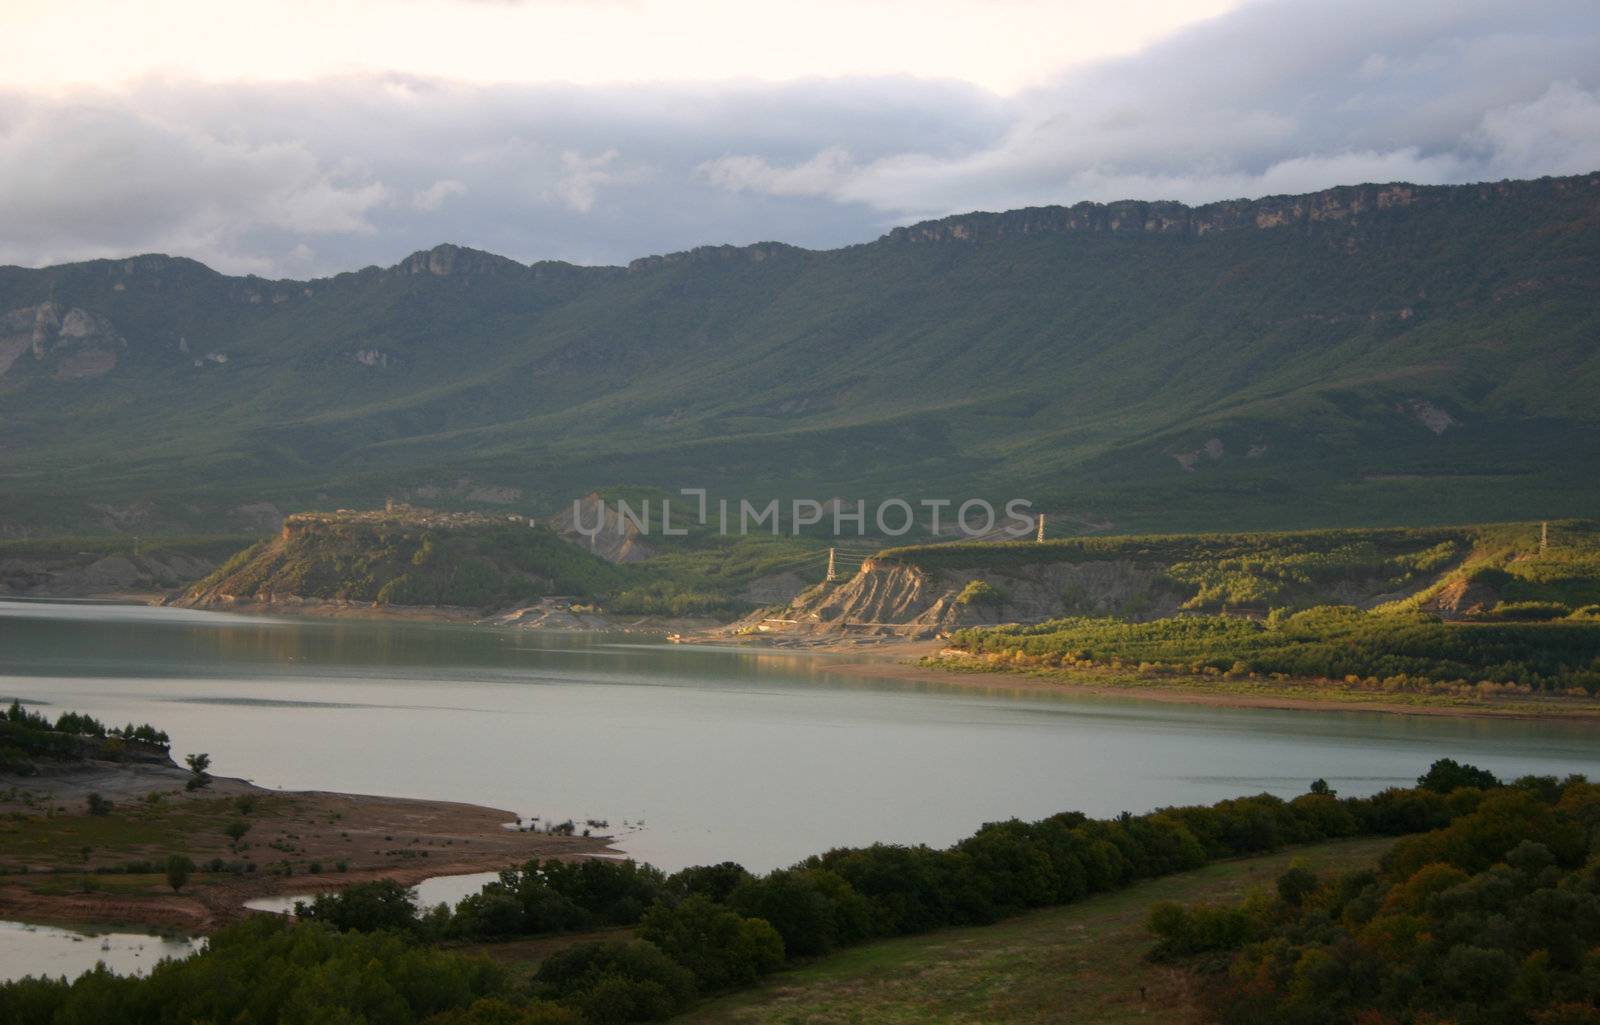 embalse de Yesa in Aragon, Spain, the planned enlargement of the reservoir is a big political and enviromental issue in the region